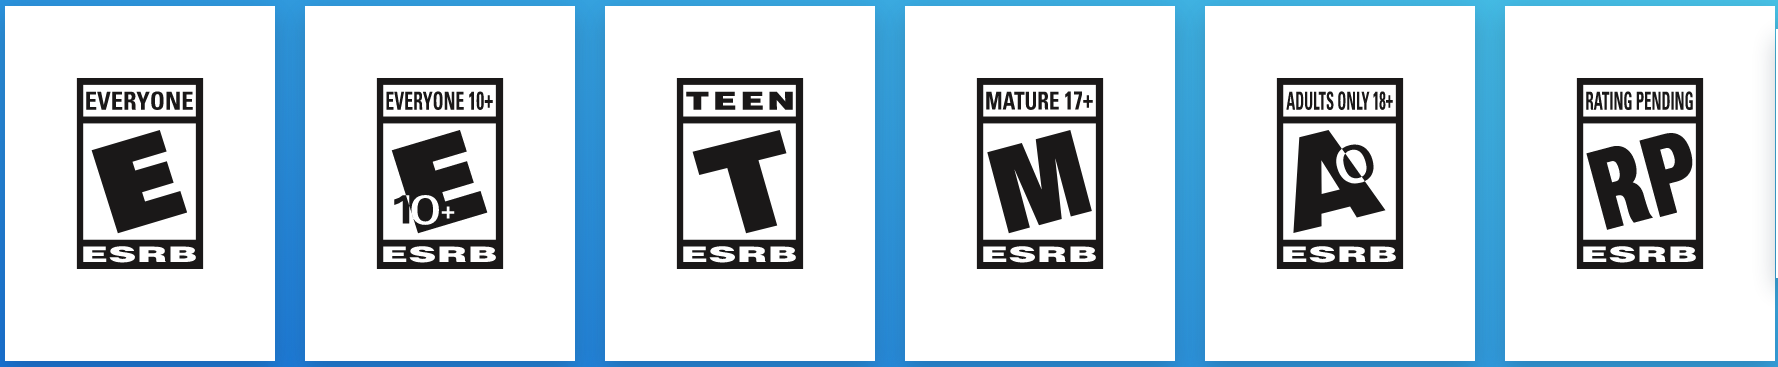 nintendo switch e rated games